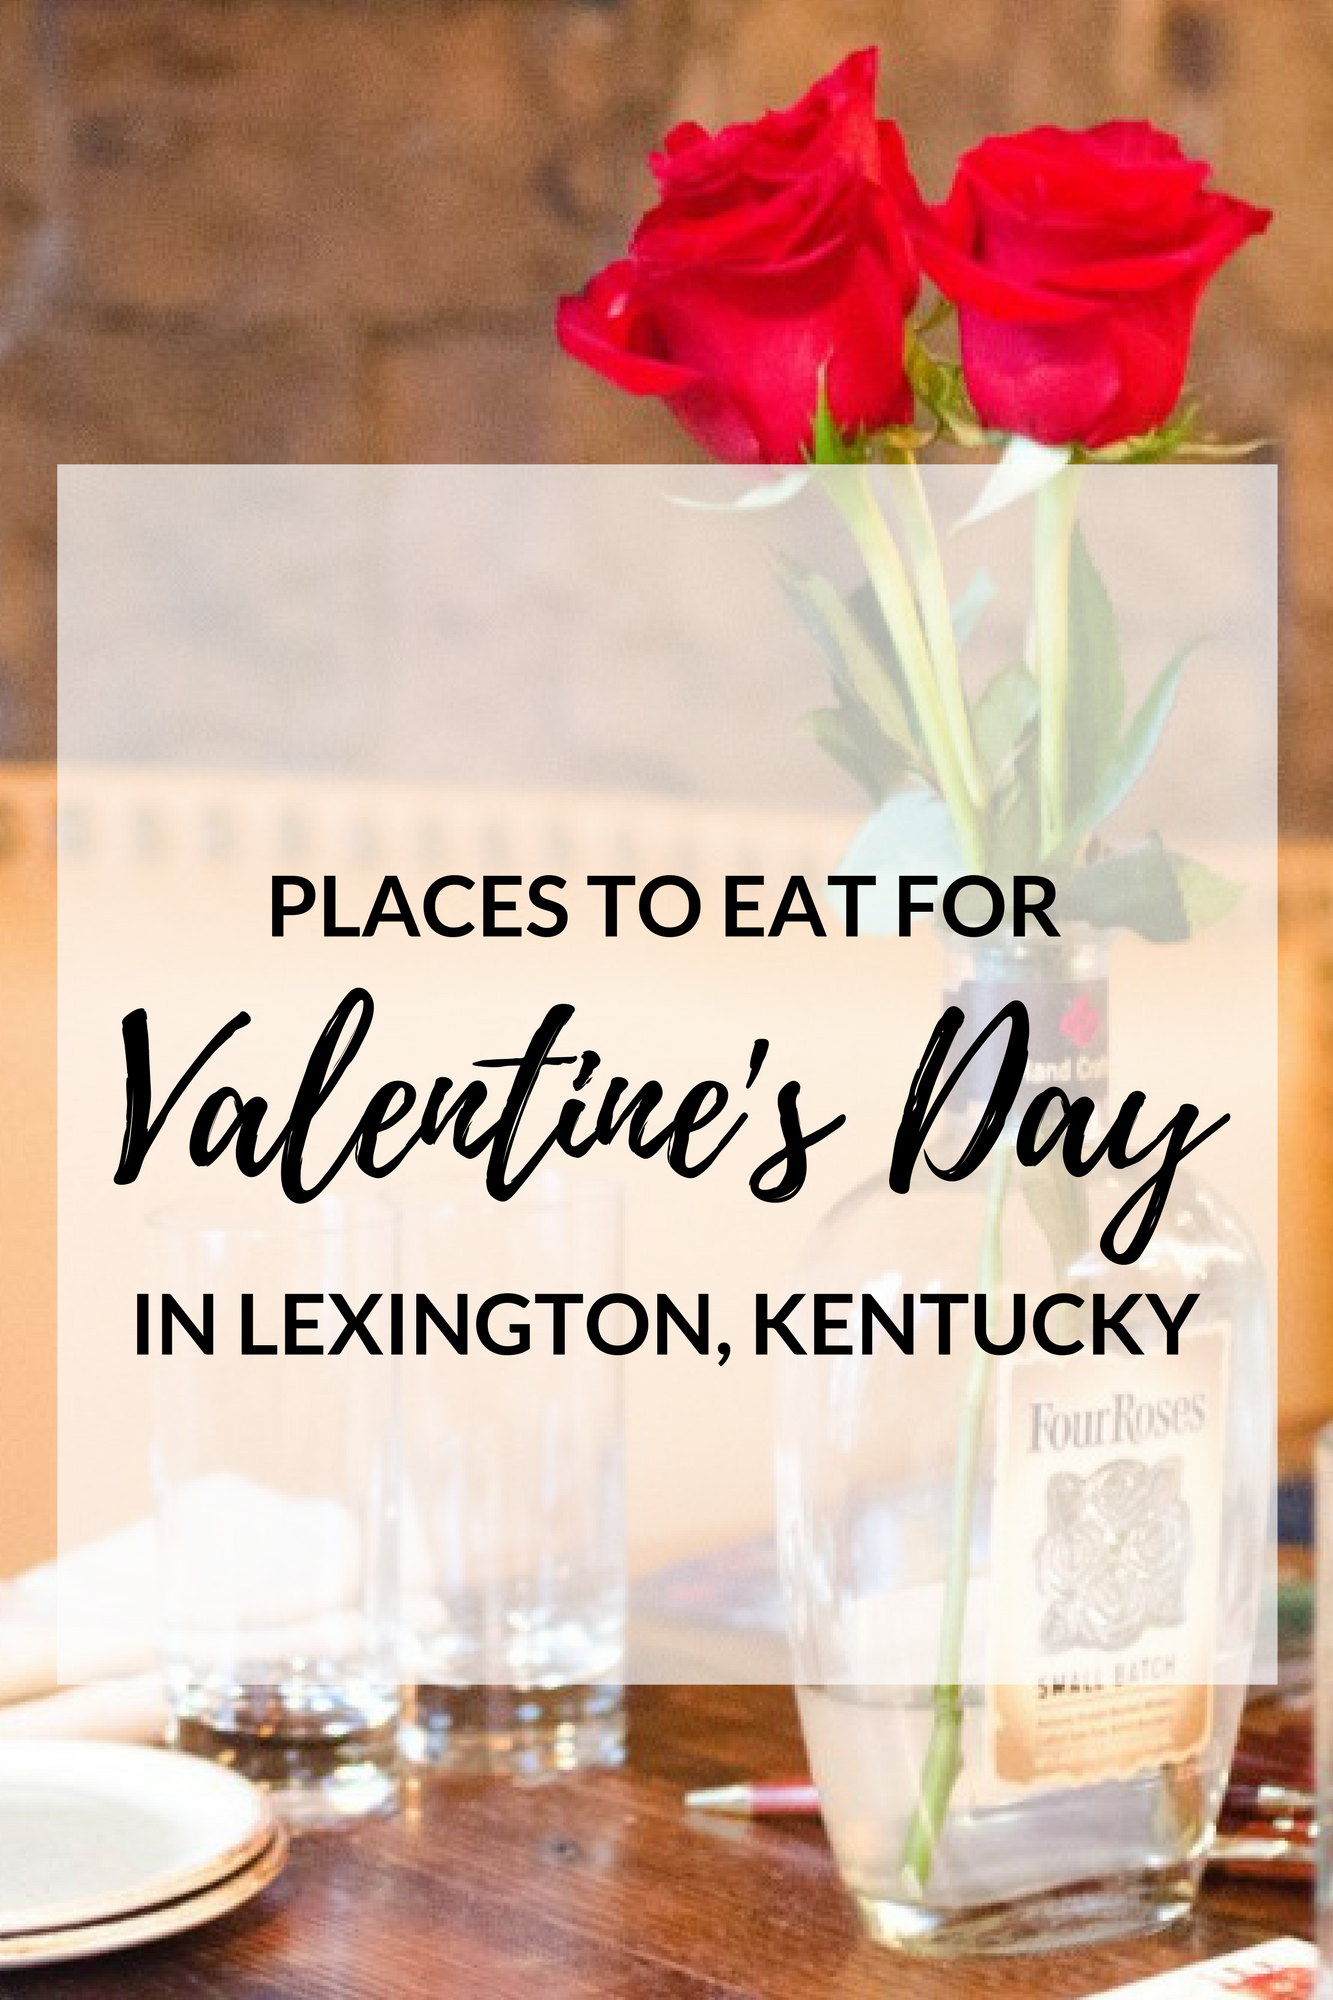 Places To Eat For Valentine's Day in Lexington, Kentucky Fabulous In